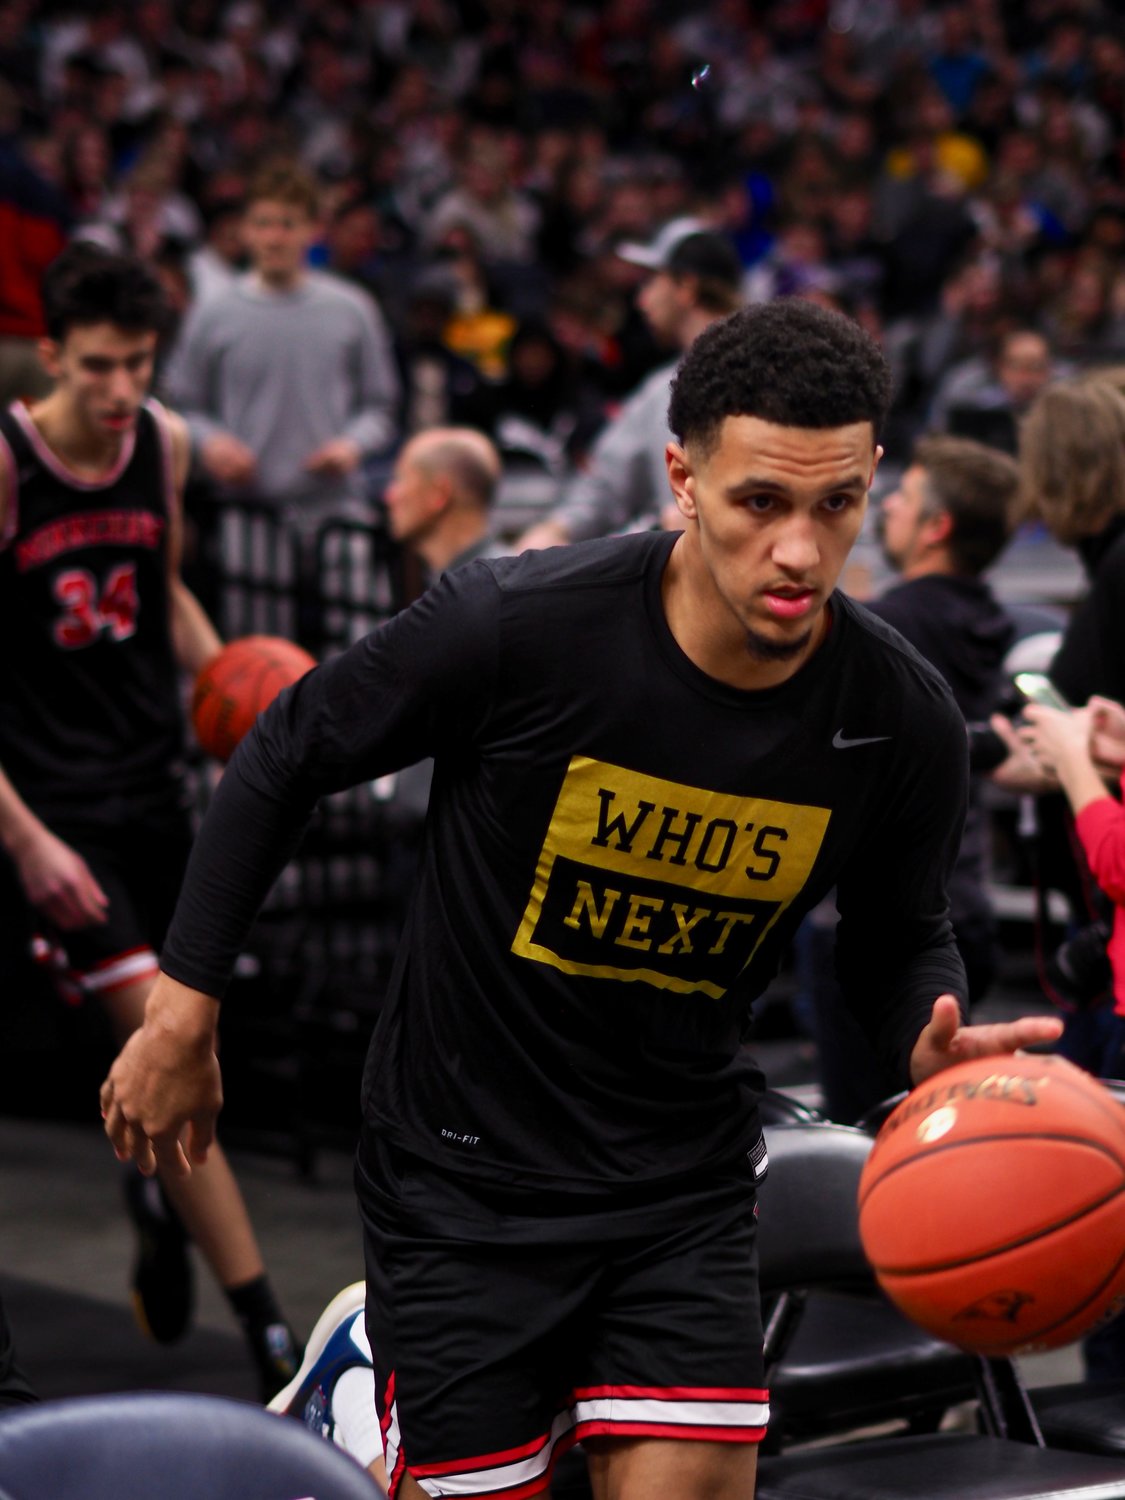 Minnehaha Academy graduate Jalen Suggs played in the NCAA tournament this year and is anticipated to be a high lottery pick in the NBA Draft this summer. (Photos submitted)